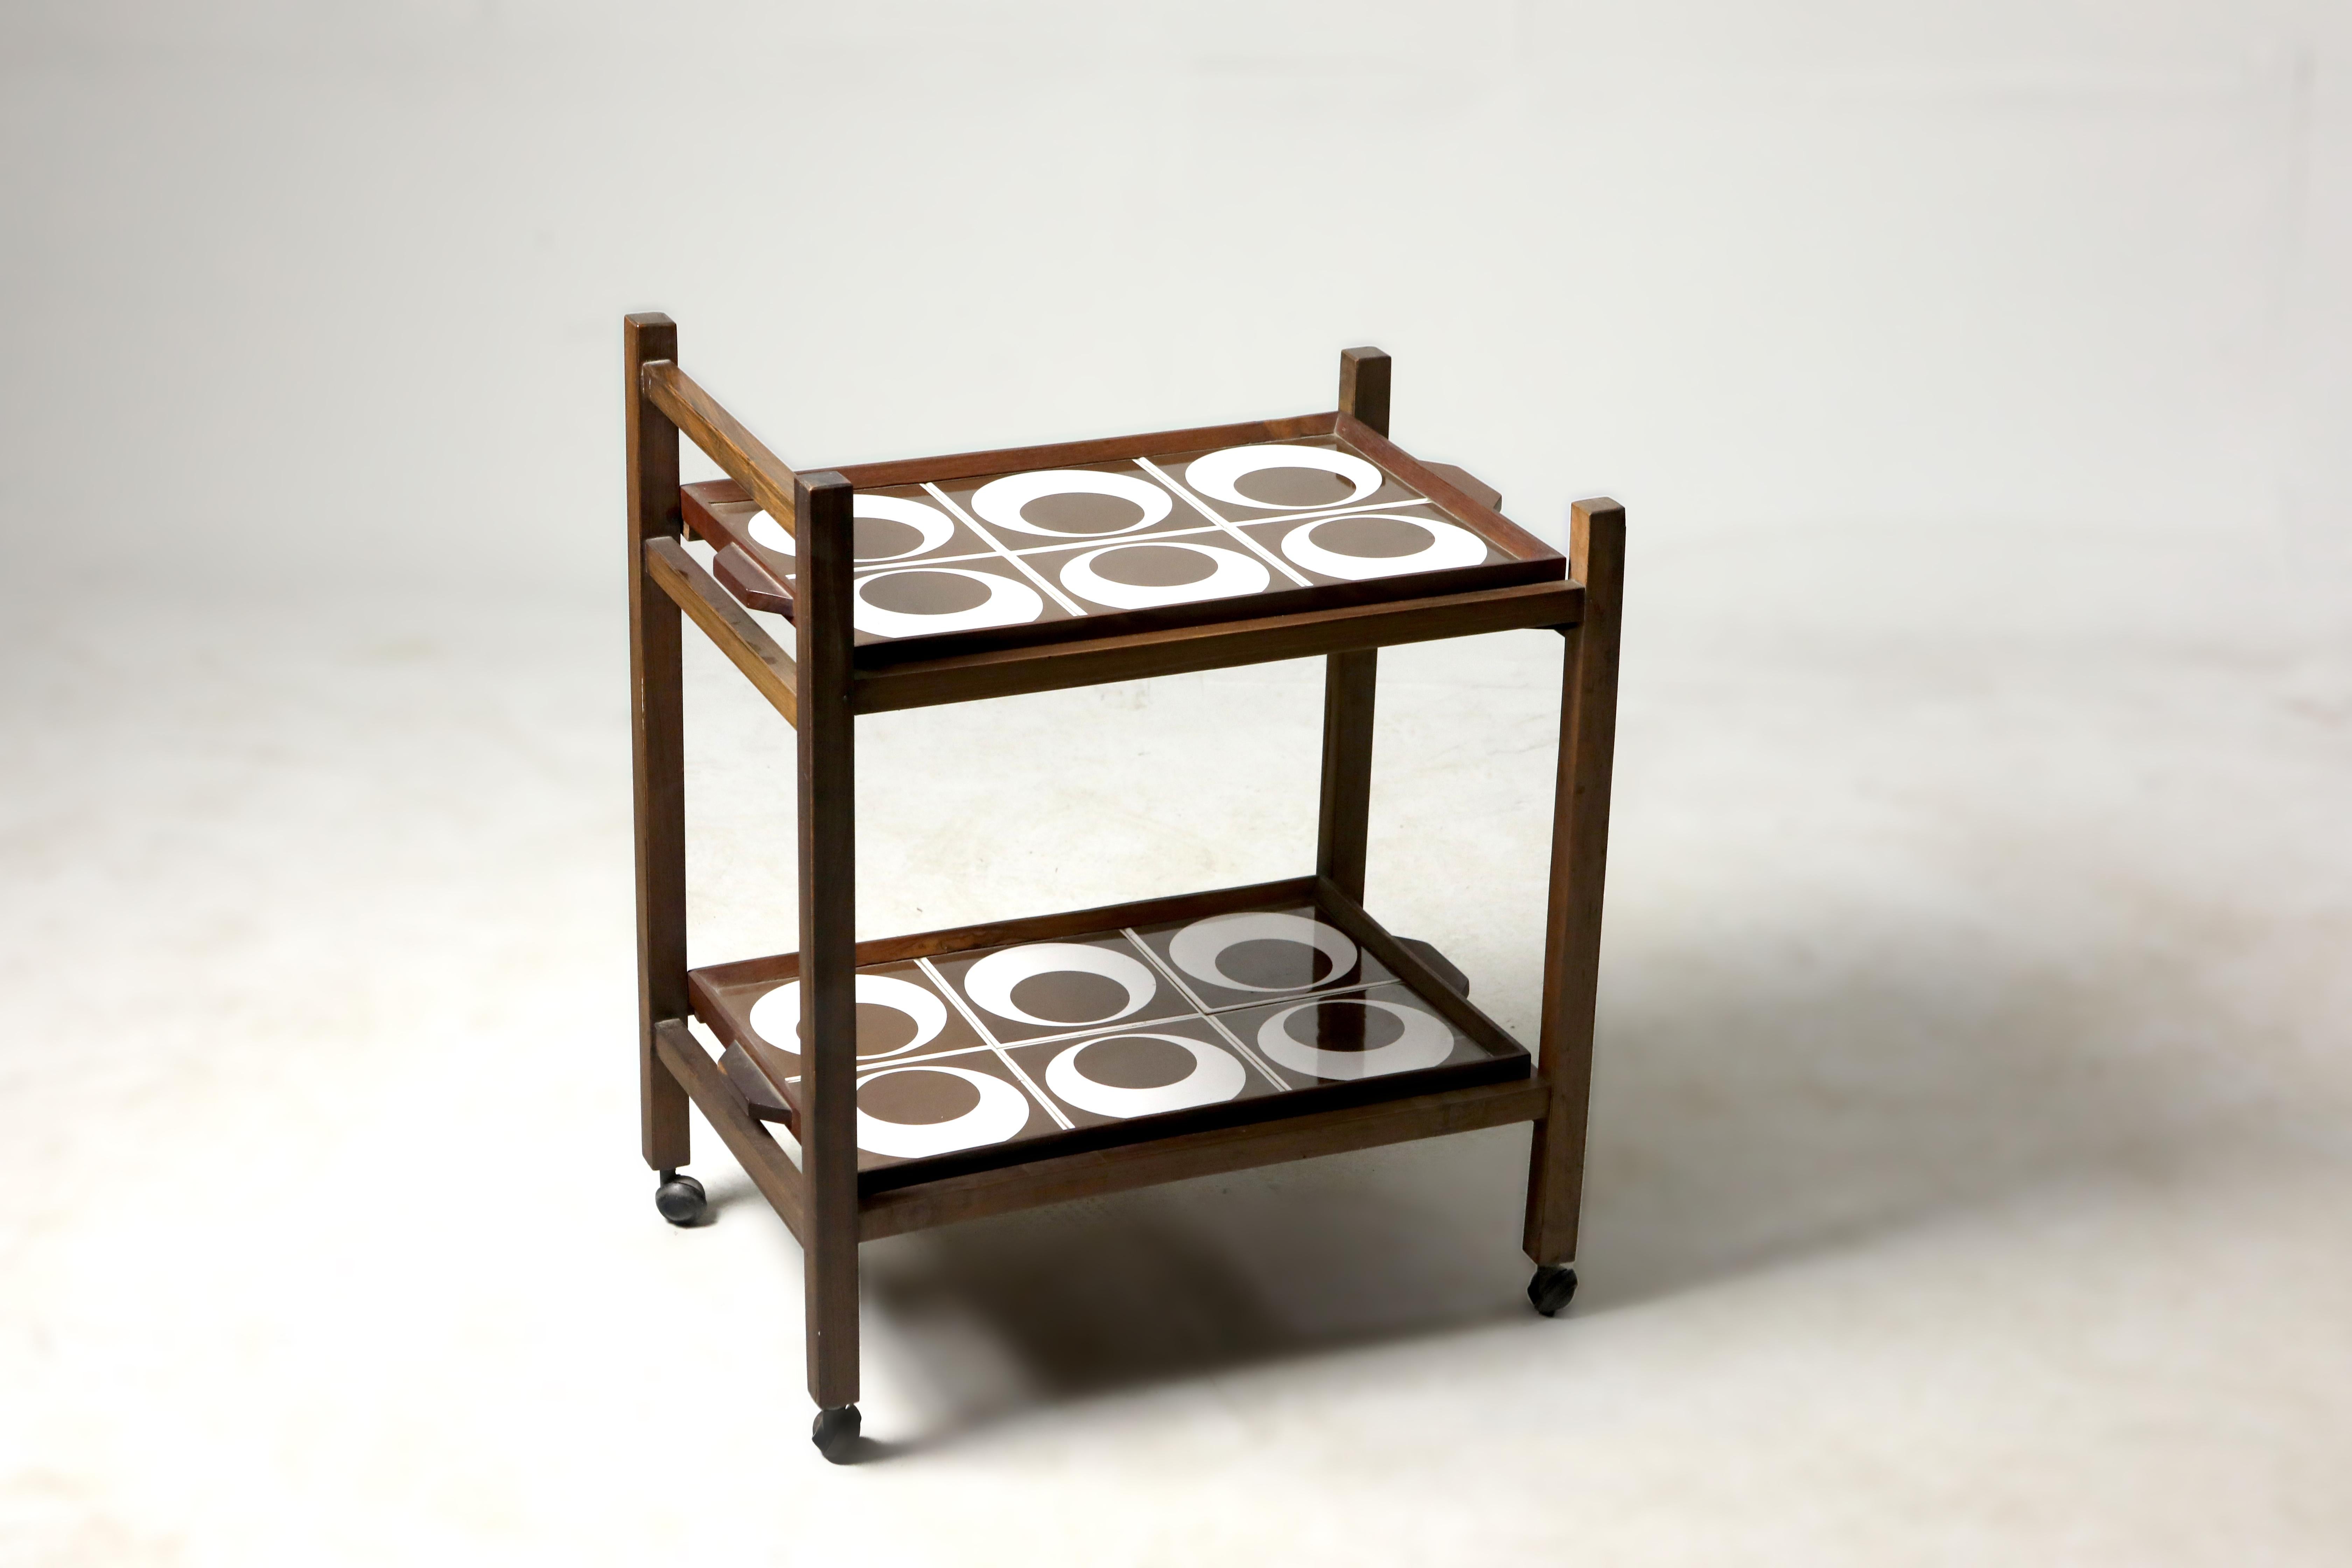 Brazilian Mid-Century Modern tile and hardwood tea-cart or bar-cart, Brazil, 1960s.

Structured in solid Brazilian hardwood, this charming 1960s tea-cart features two removable trays lined with brown and white ceramic tiles and casters for